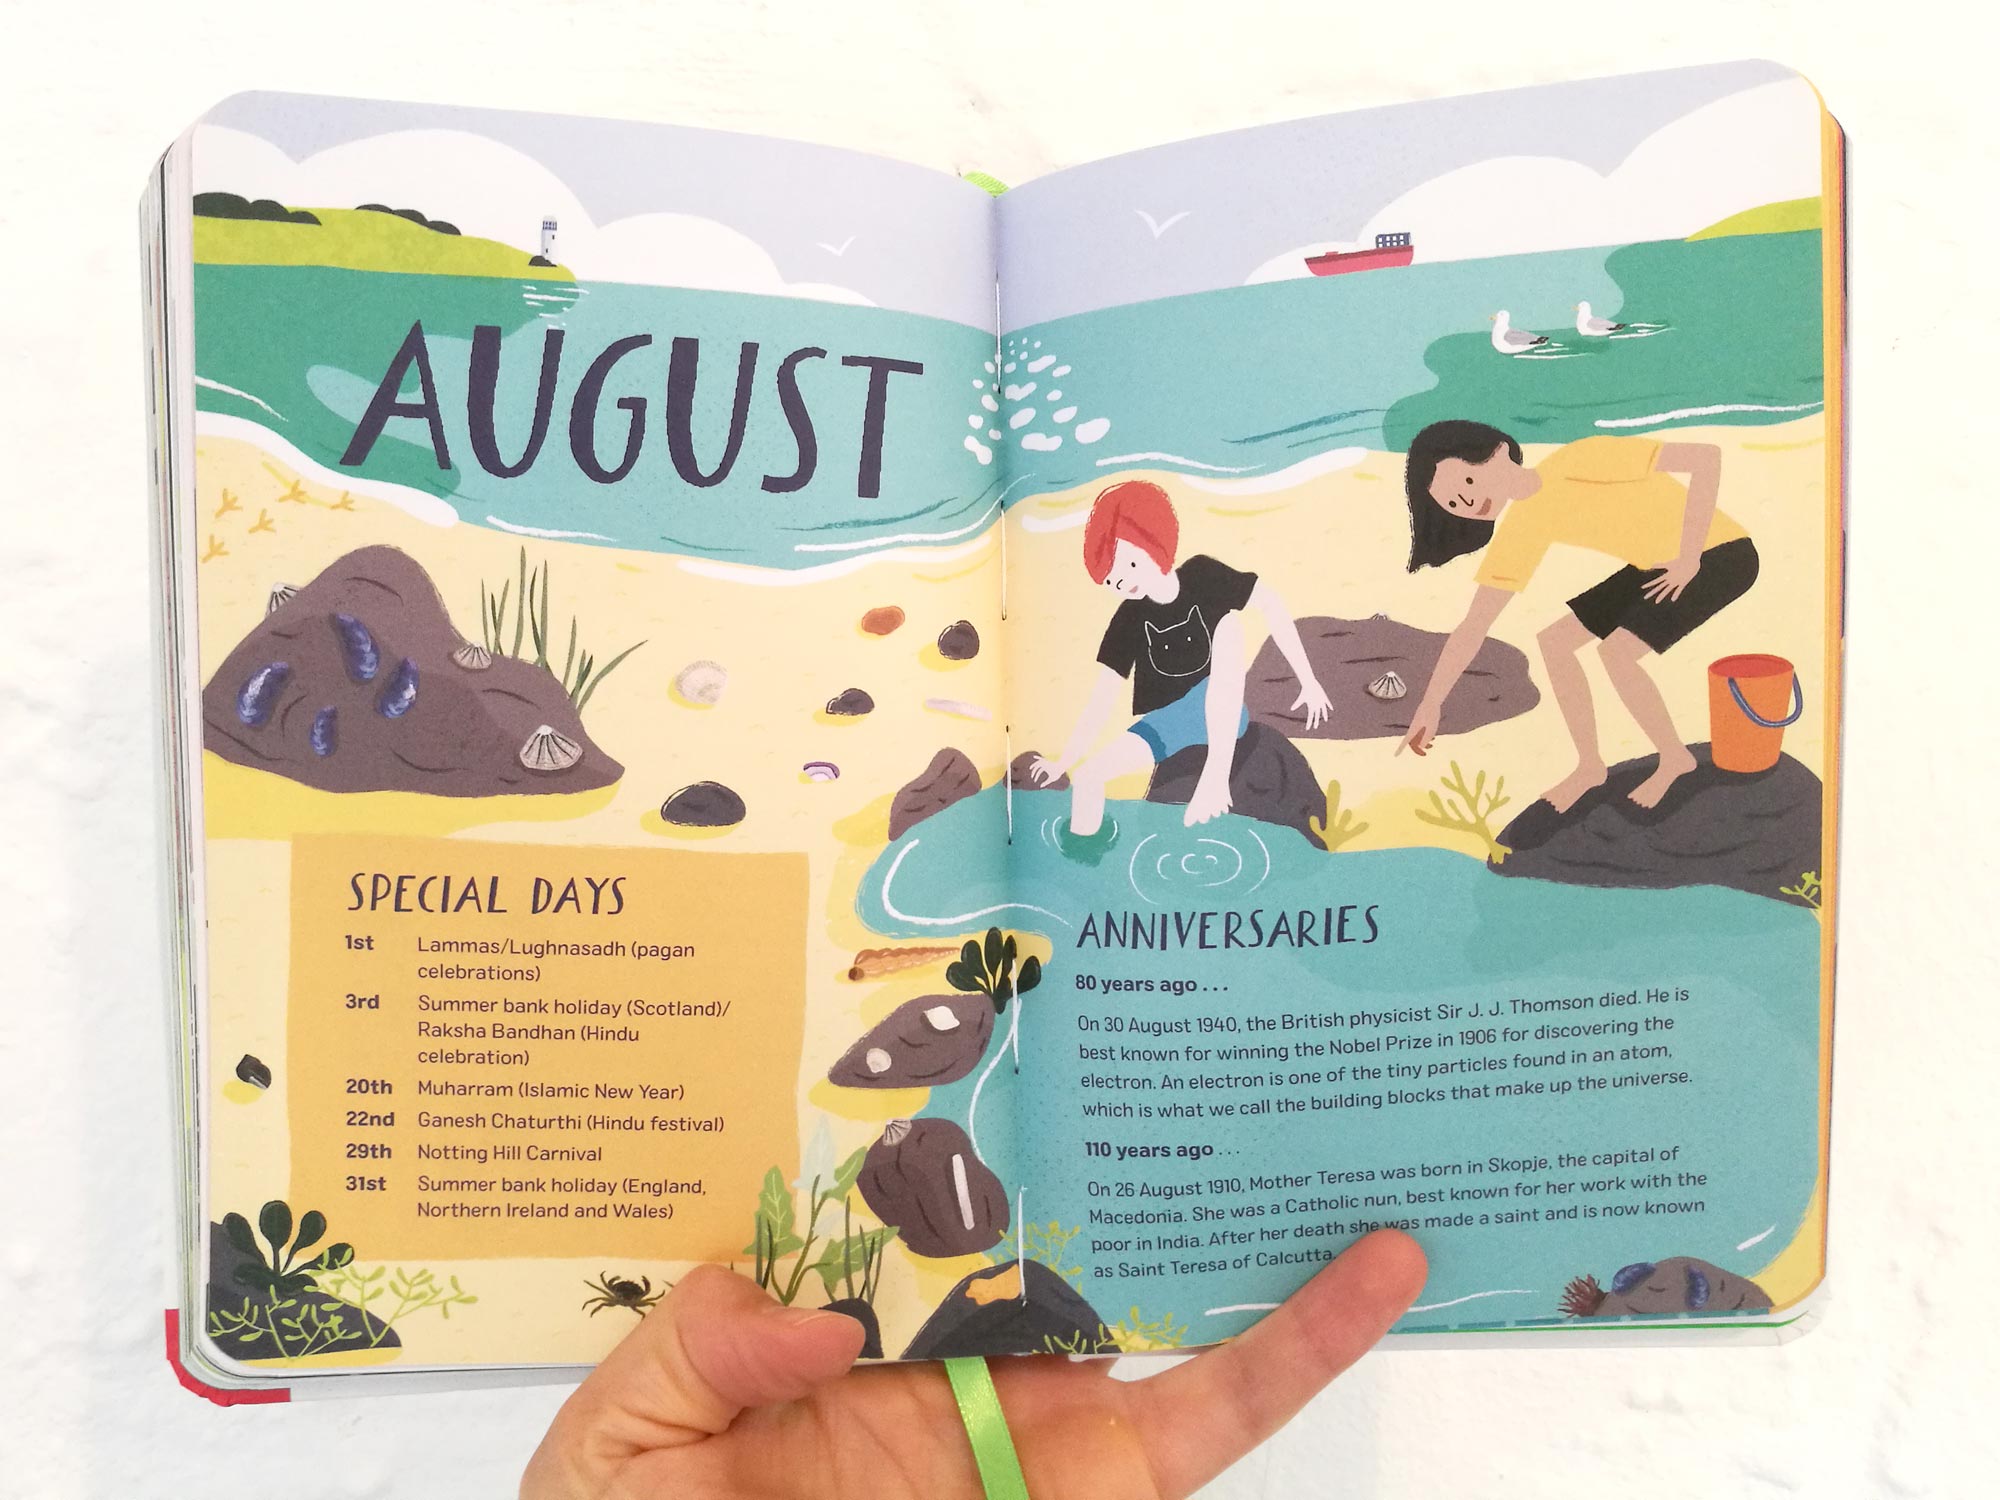 August opening spread for 2020 Nature Month by Month illustrated by Elly Jahnz